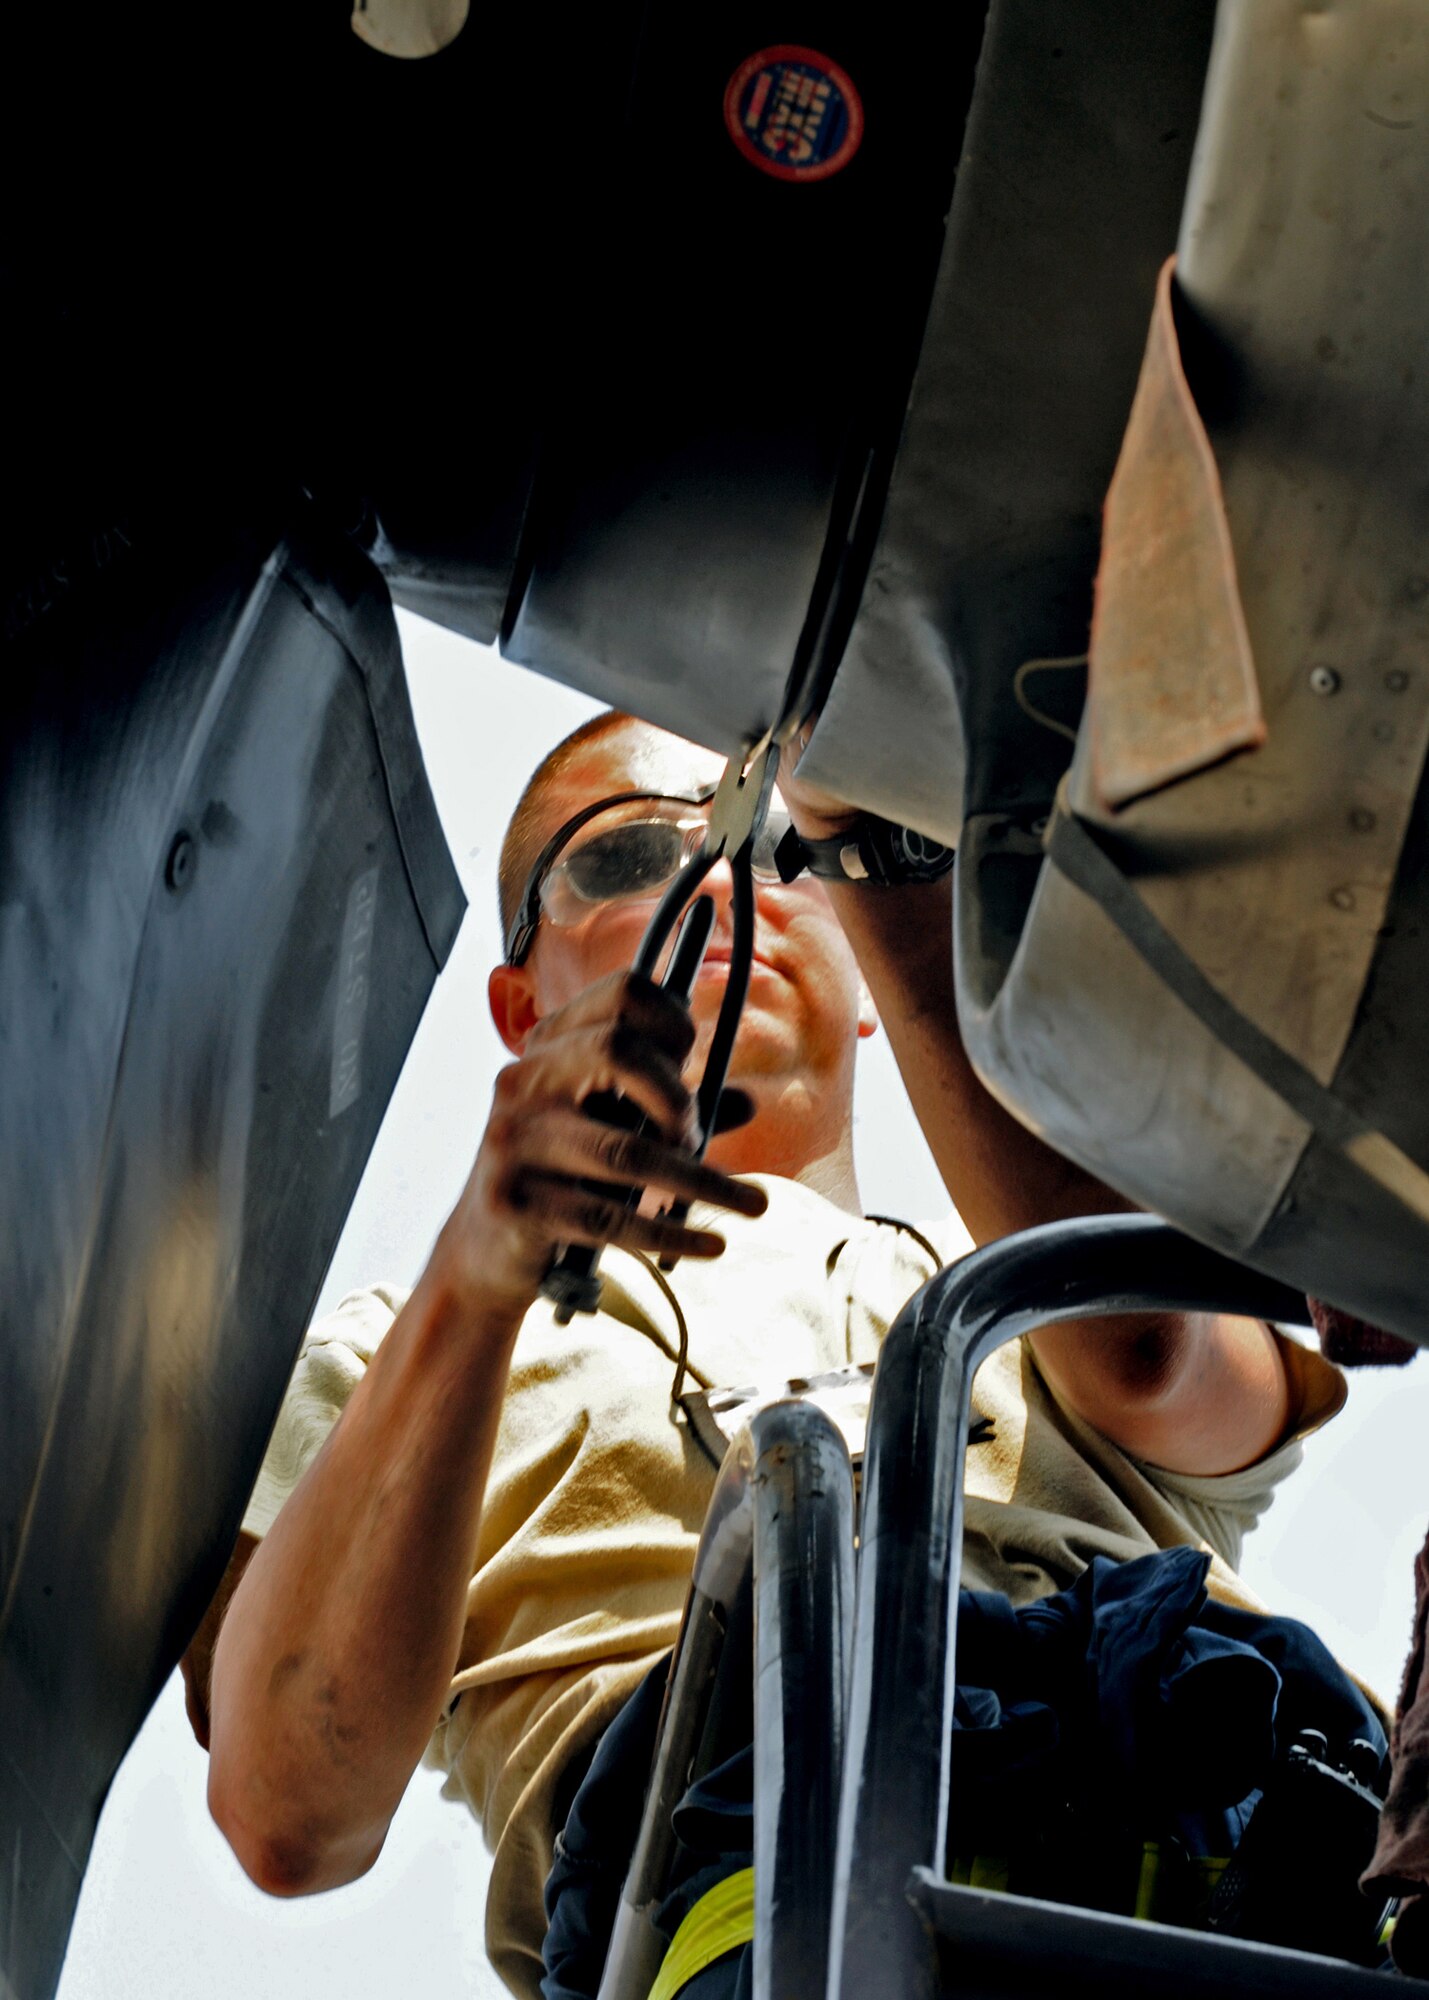 SOUTHWEST ASIA - Tech. Sgt. Christopher Chadwell, a propulsion craftsman with the 386th Expeditionary Aircraft Maintenance Squadron, secures the filler cap to a pressurized sump after a hydraulic fluid level check on a C-130E Hercules at an undisclosed location here August 11, 2010. The 386 EAMXS is one of the busiest C-130 combat airlift and EC-130 electronic attack maintenance units in U.S. Air Forces Central Command. (U.S. Air Force photo by Senior Airman Laura Turner)